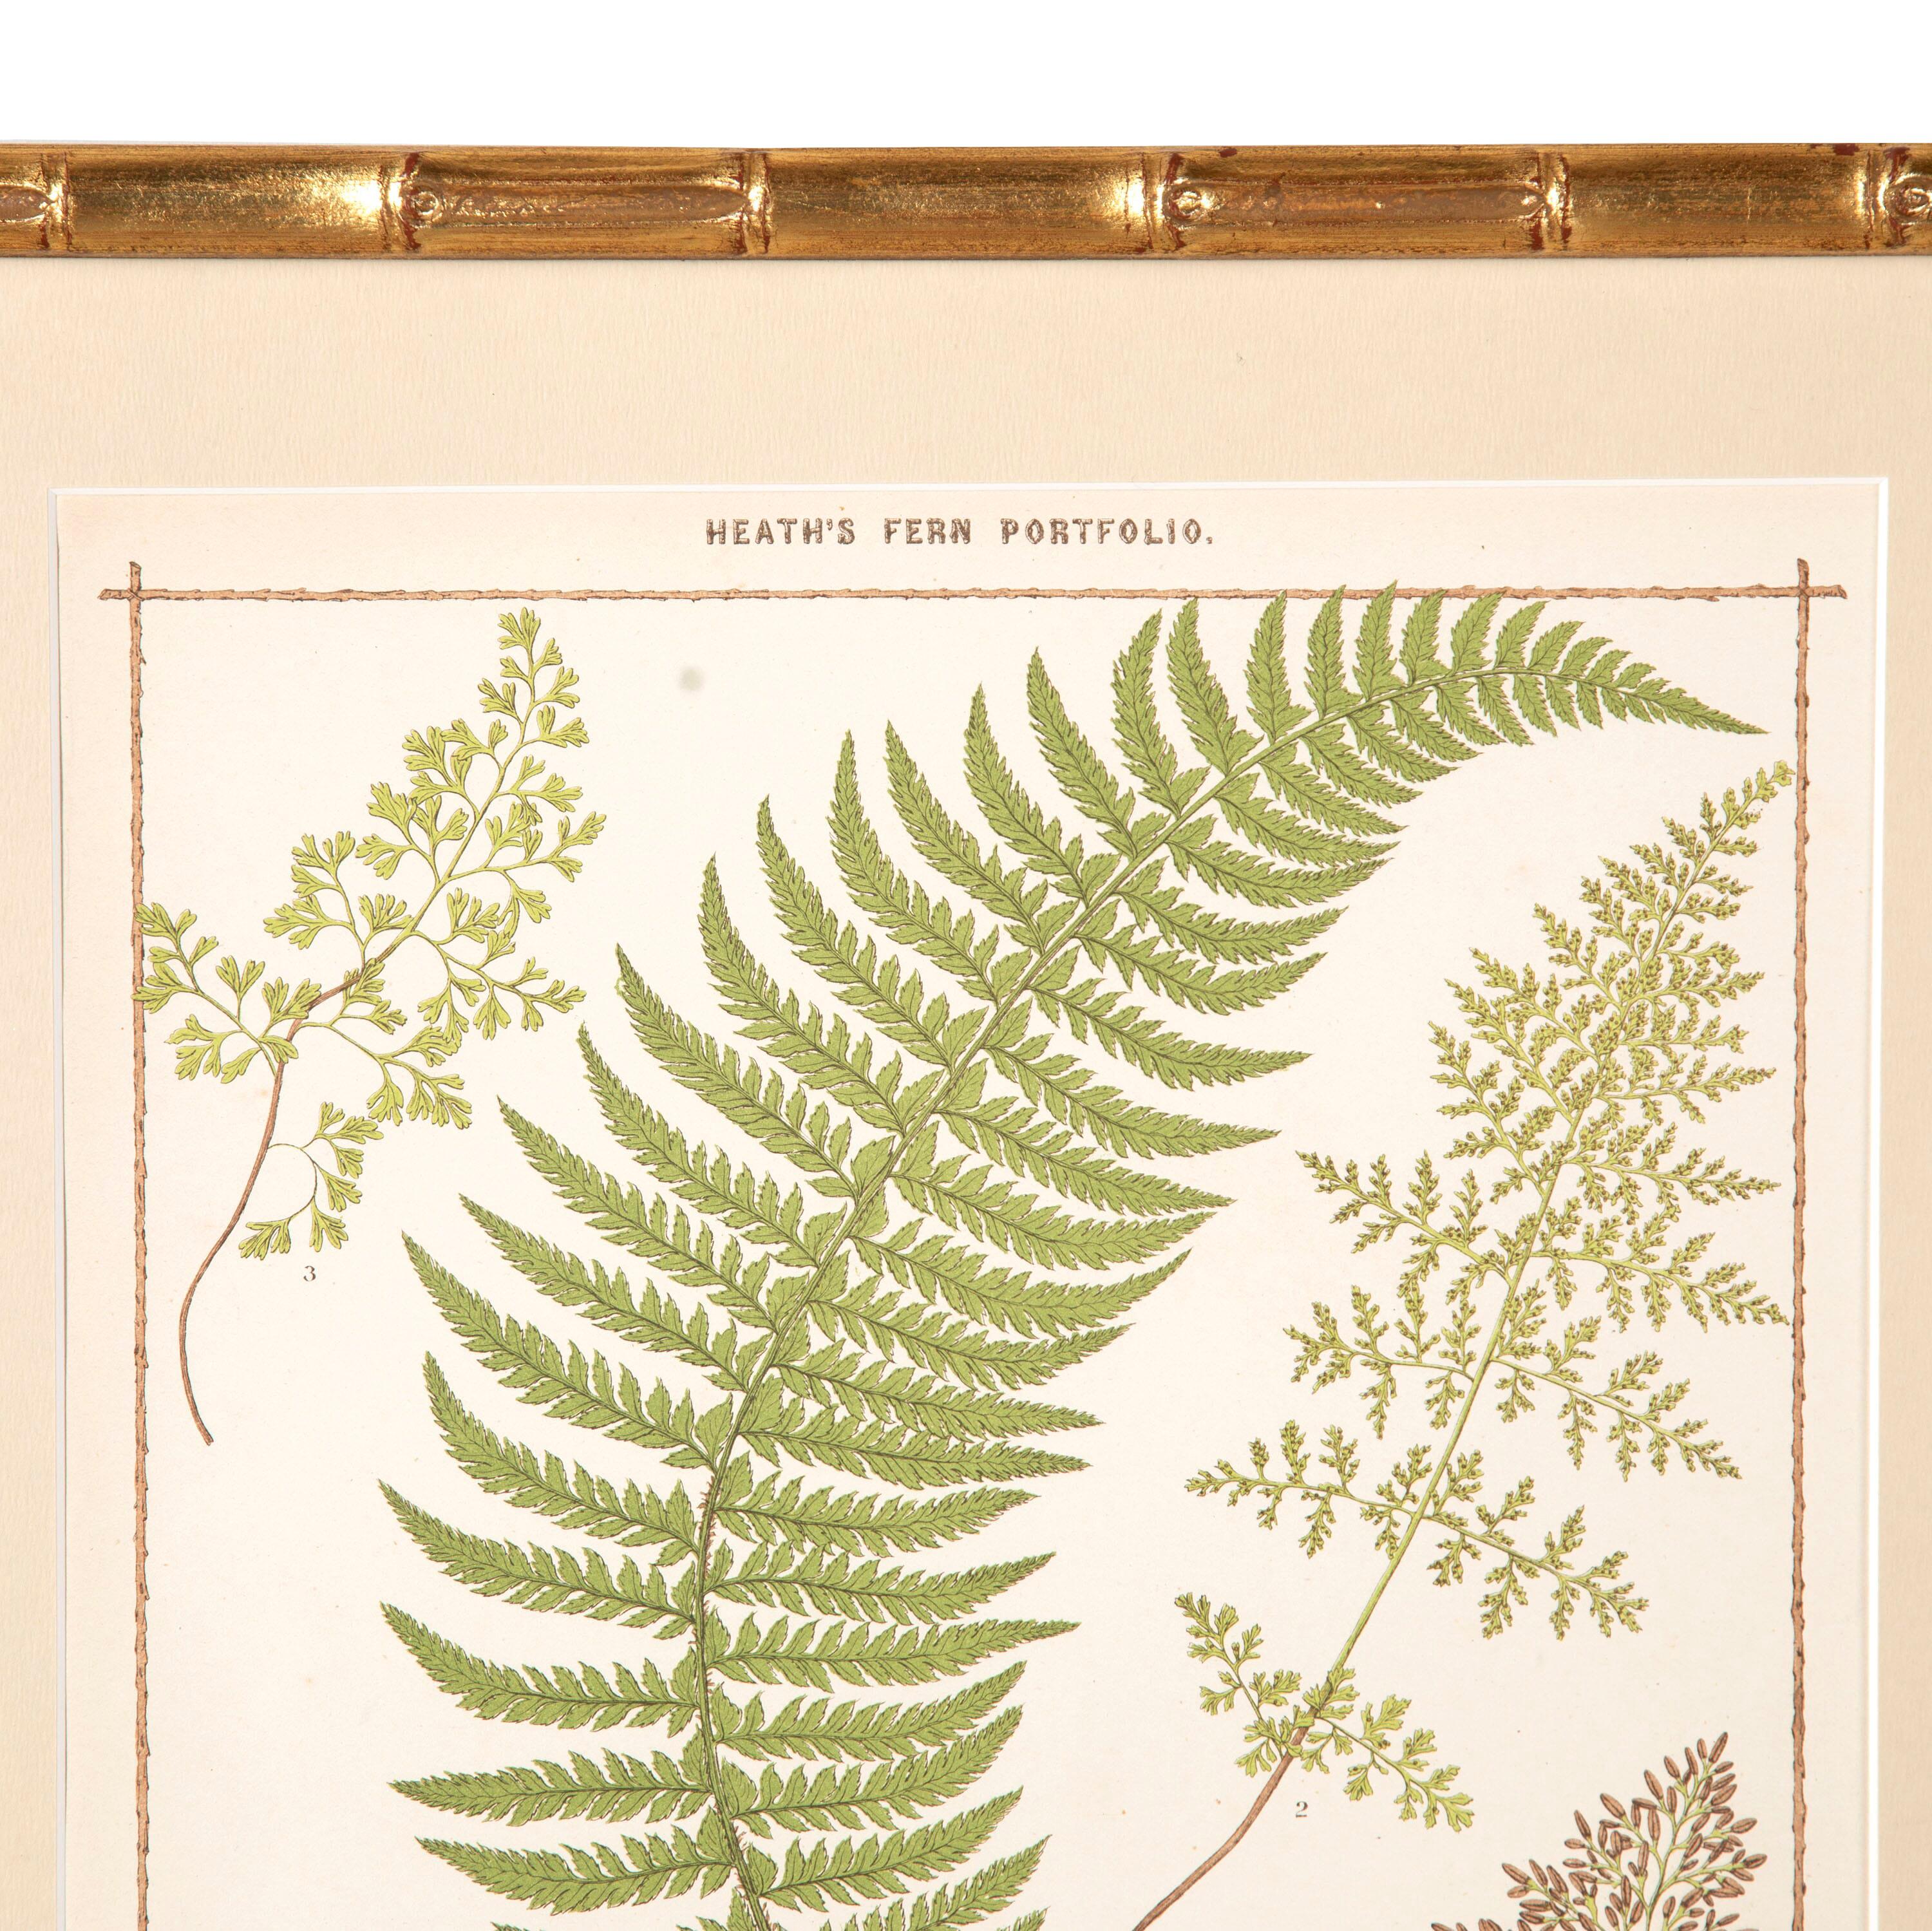 Wonderful set of six 'British Ferns' by Francis George Heath. 

Each chromolithograph is mounted within a beautifully carved Italian frame that supports a UV glass plate. The UV glass creates extra protection against daylight and cuts reflection